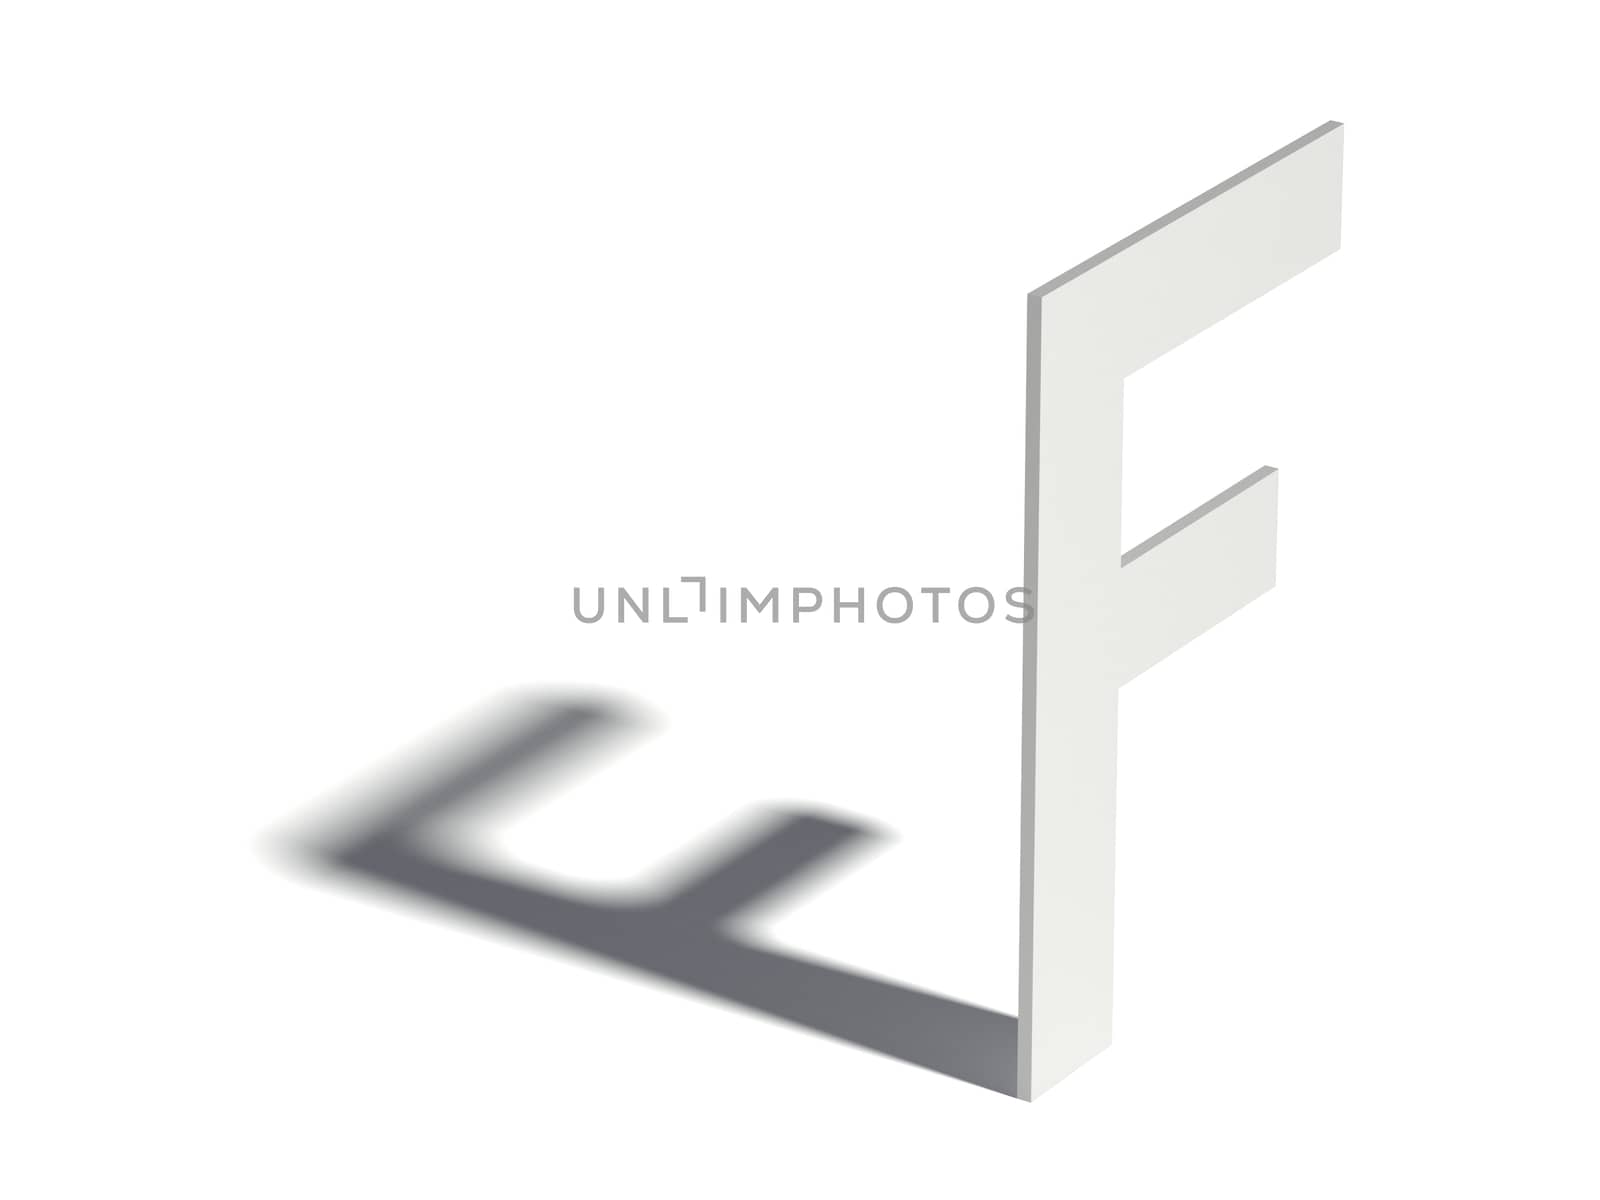 Drop shadow font. Letter F. 3D render illustration isolated on white background